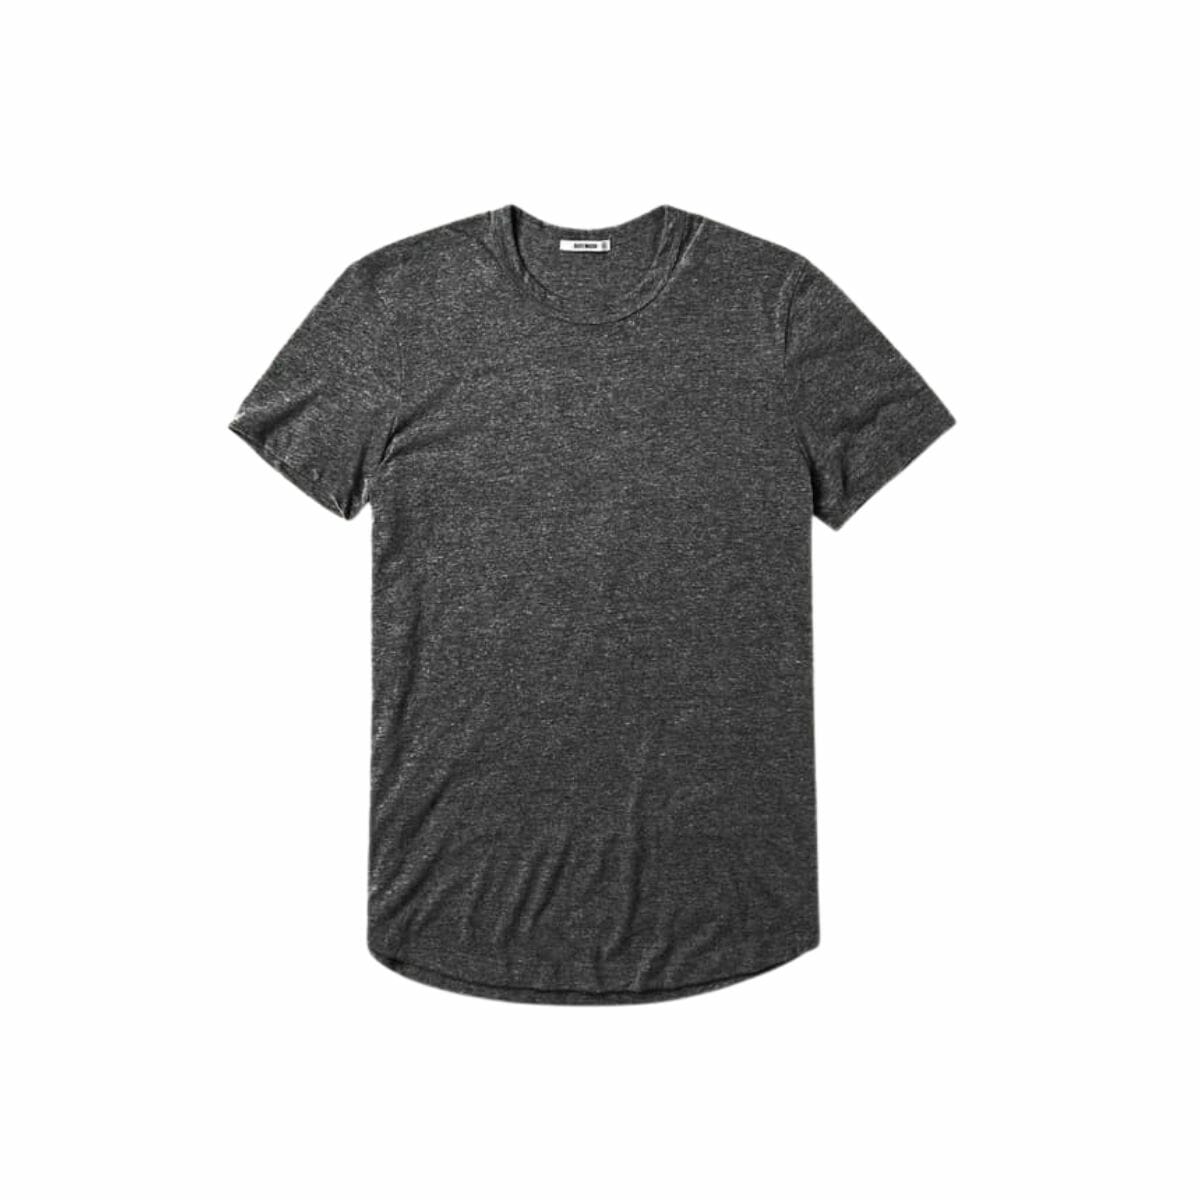 True Classic Tees Review: Don't buy before checking out our review 3